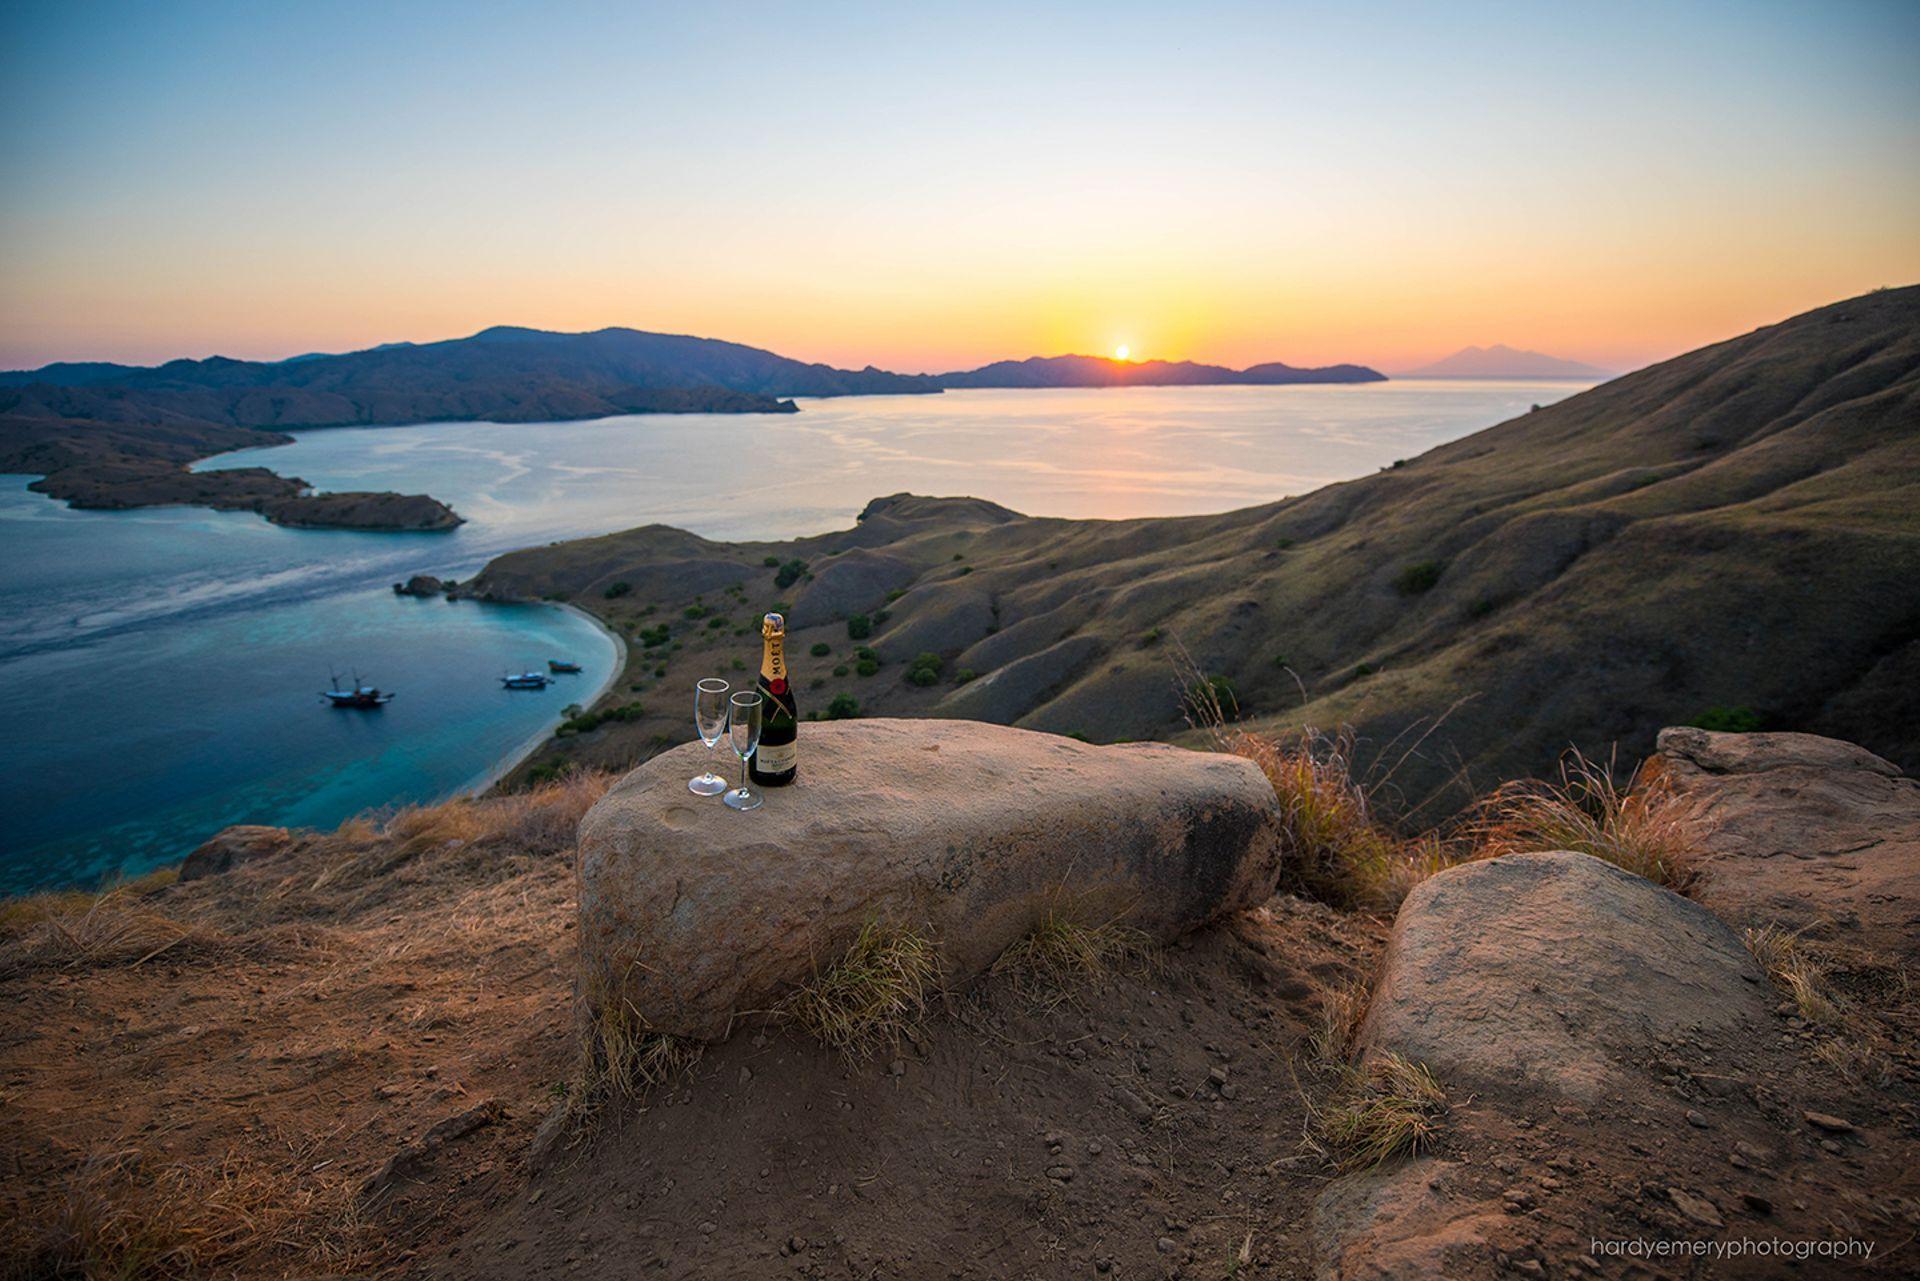 Day Sailing Cruise in Komodo National Park, from $8000